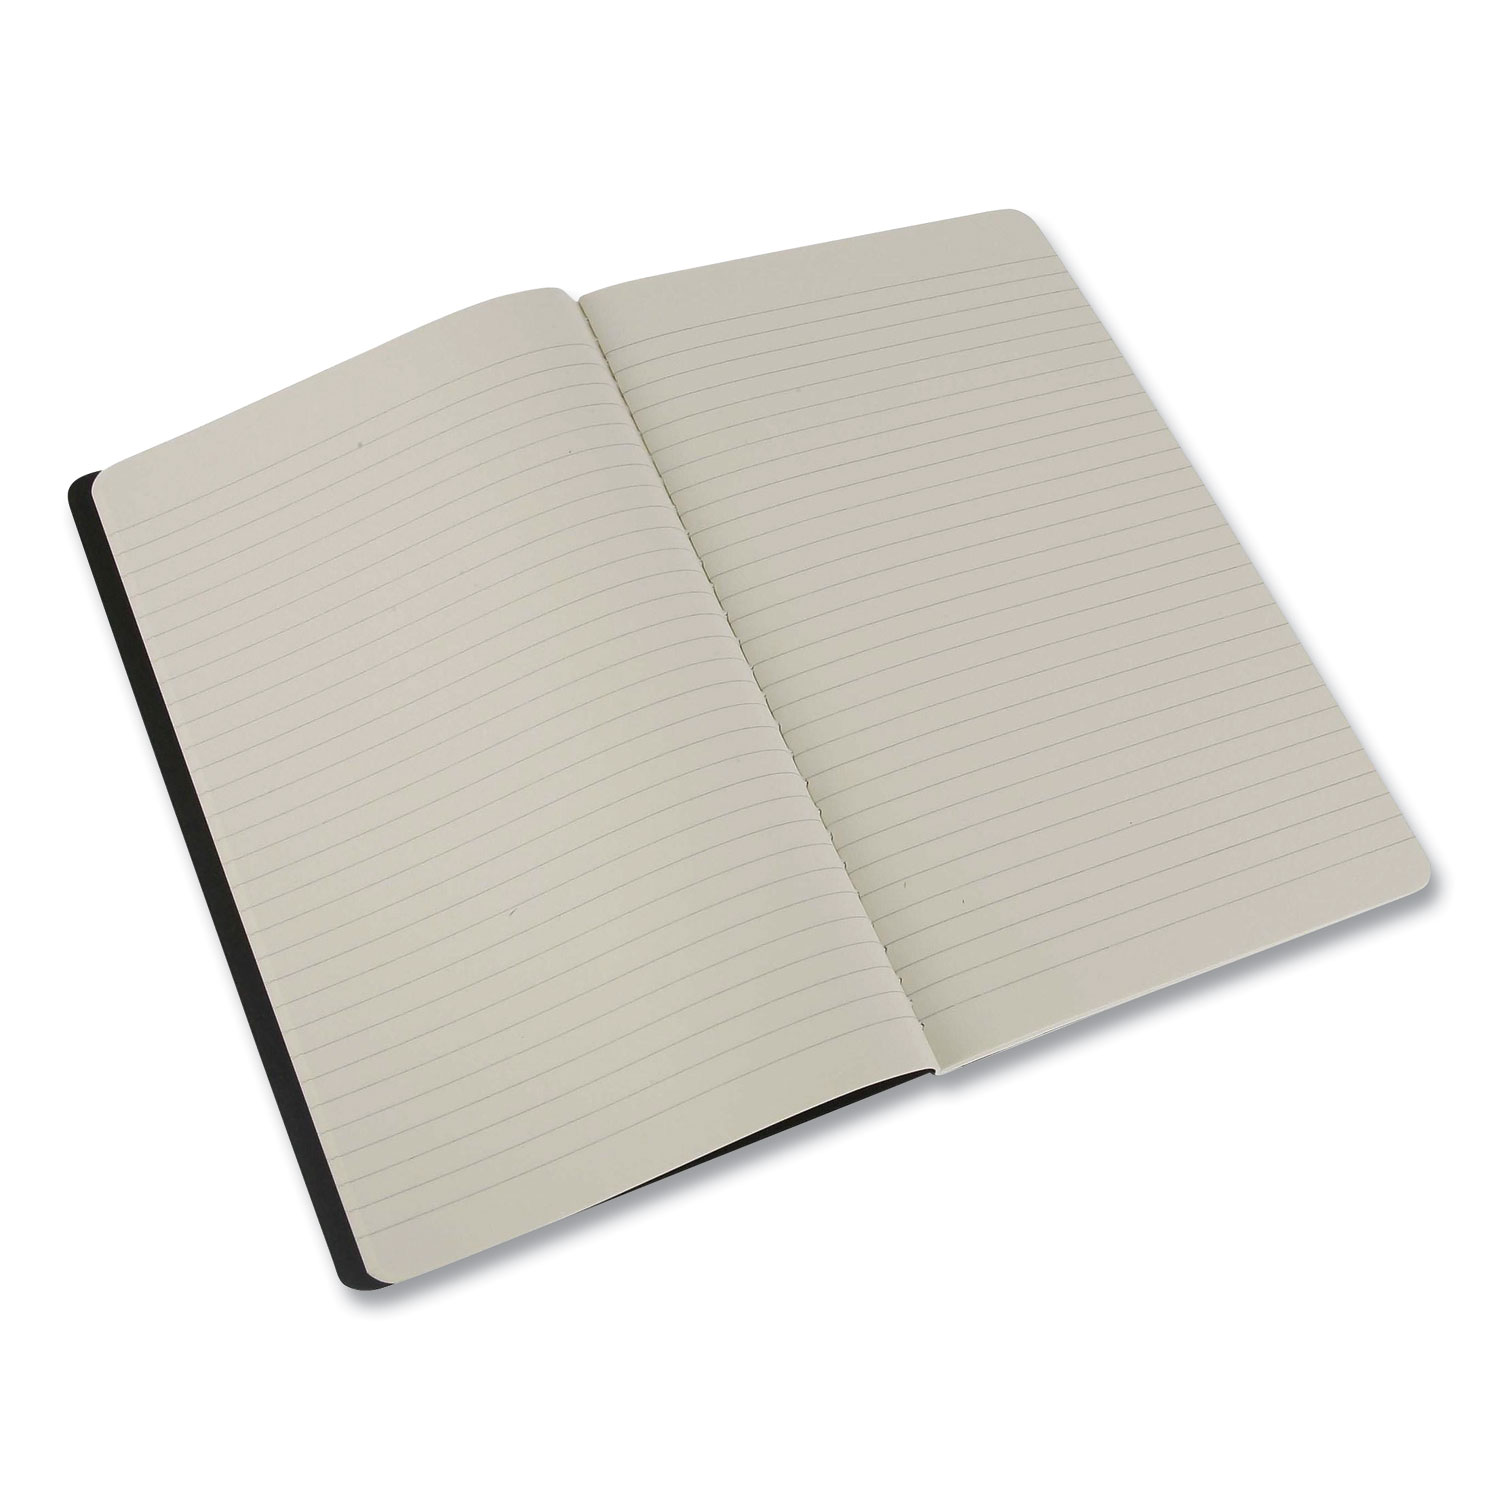  Moleskine 704956 Cahier Journal, Narrow Ruled, Black Cover, 8.25 x 5, 80 Pages, 3/Pack (HBG401618) 